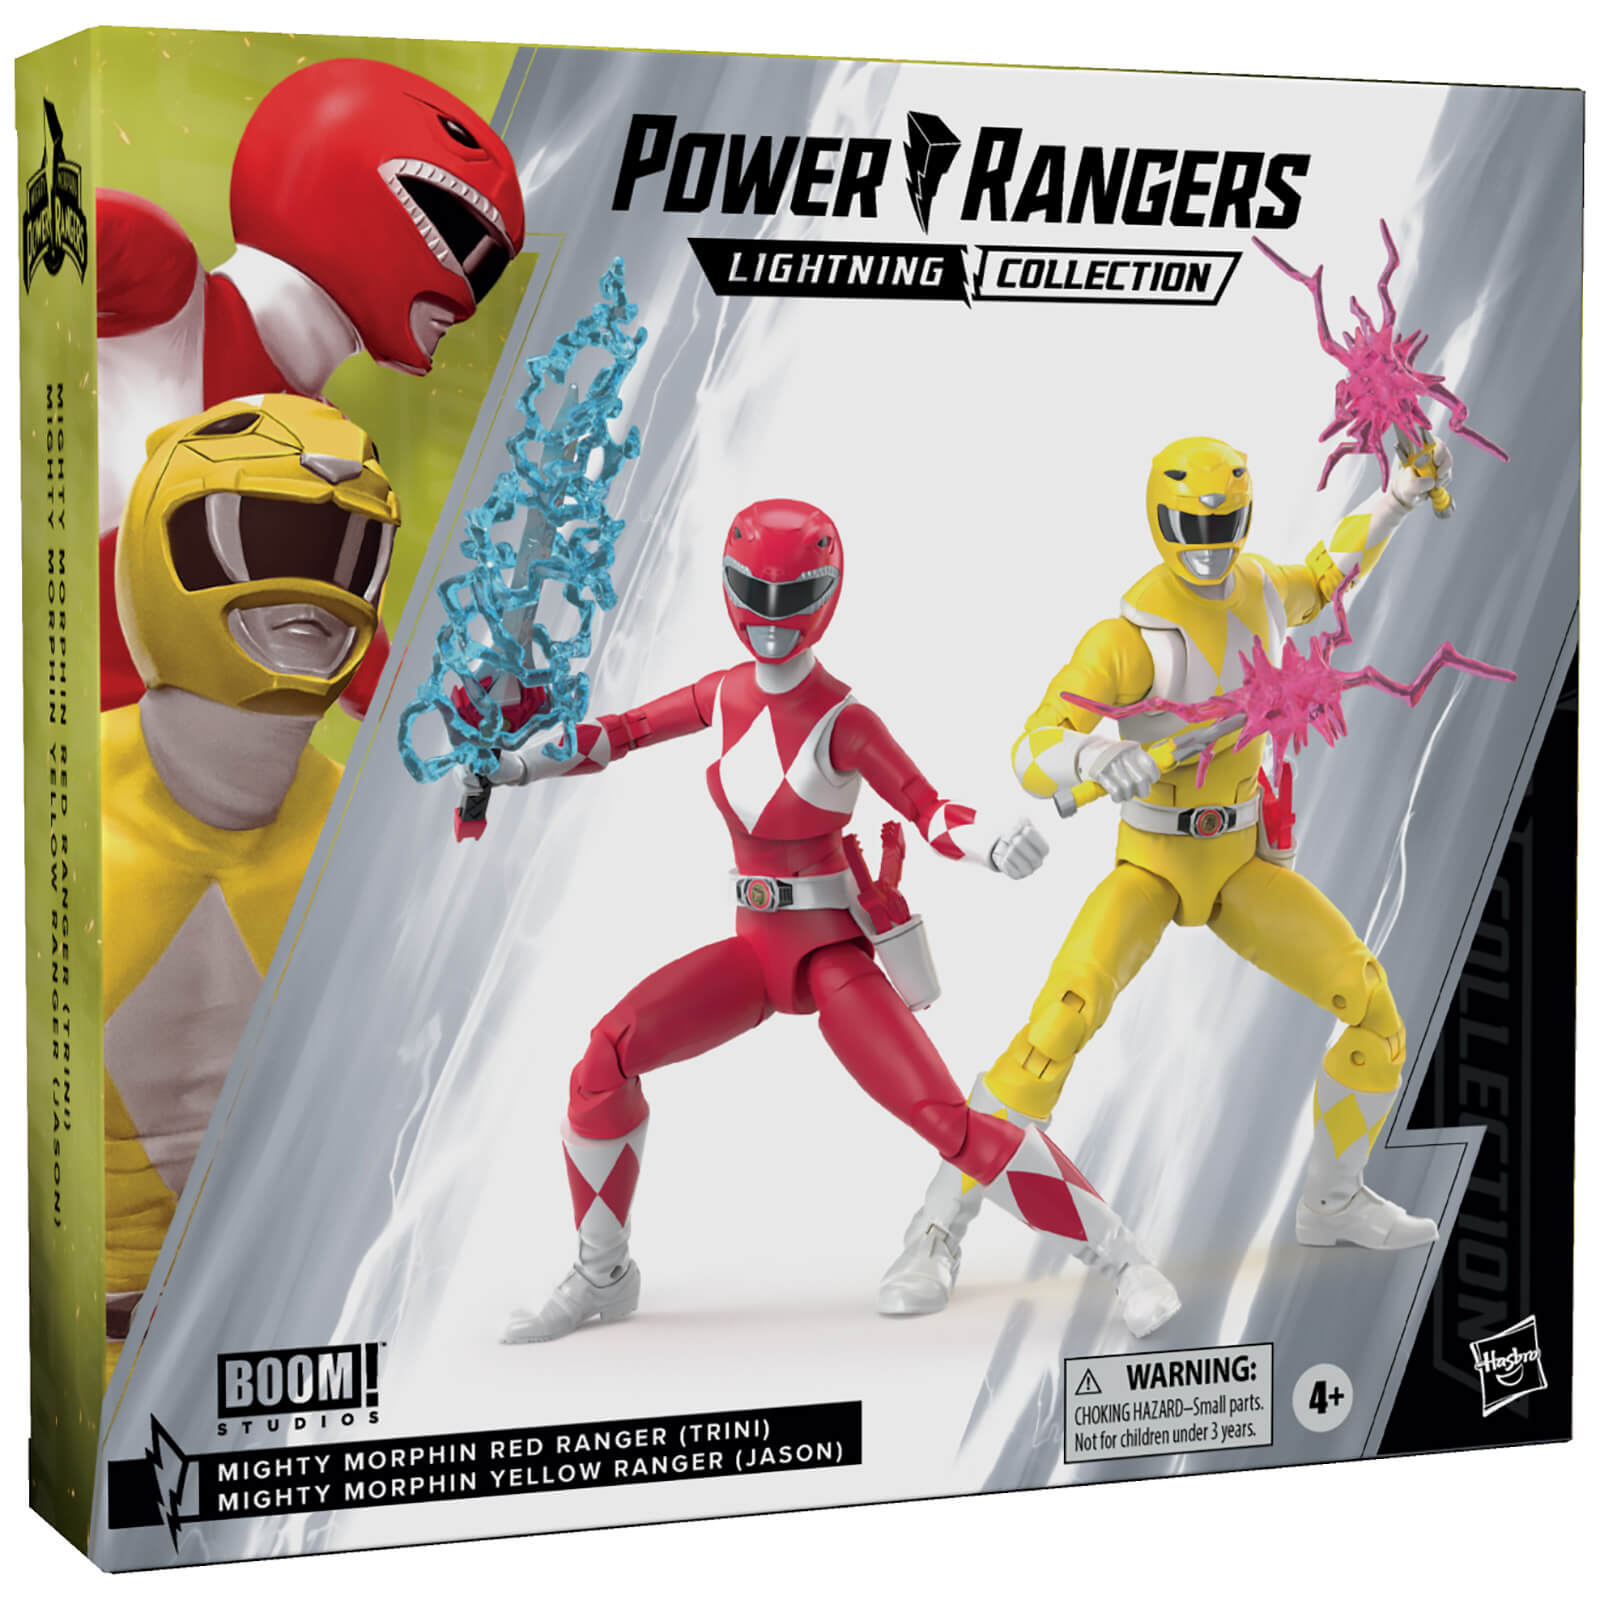 Hasbro Power Rangers Lightning Collection Mighty Morphin Yellow & Red Ranger “Swap” Jason & Trini 2-pack 6 Inch Action Figures - Exclusive